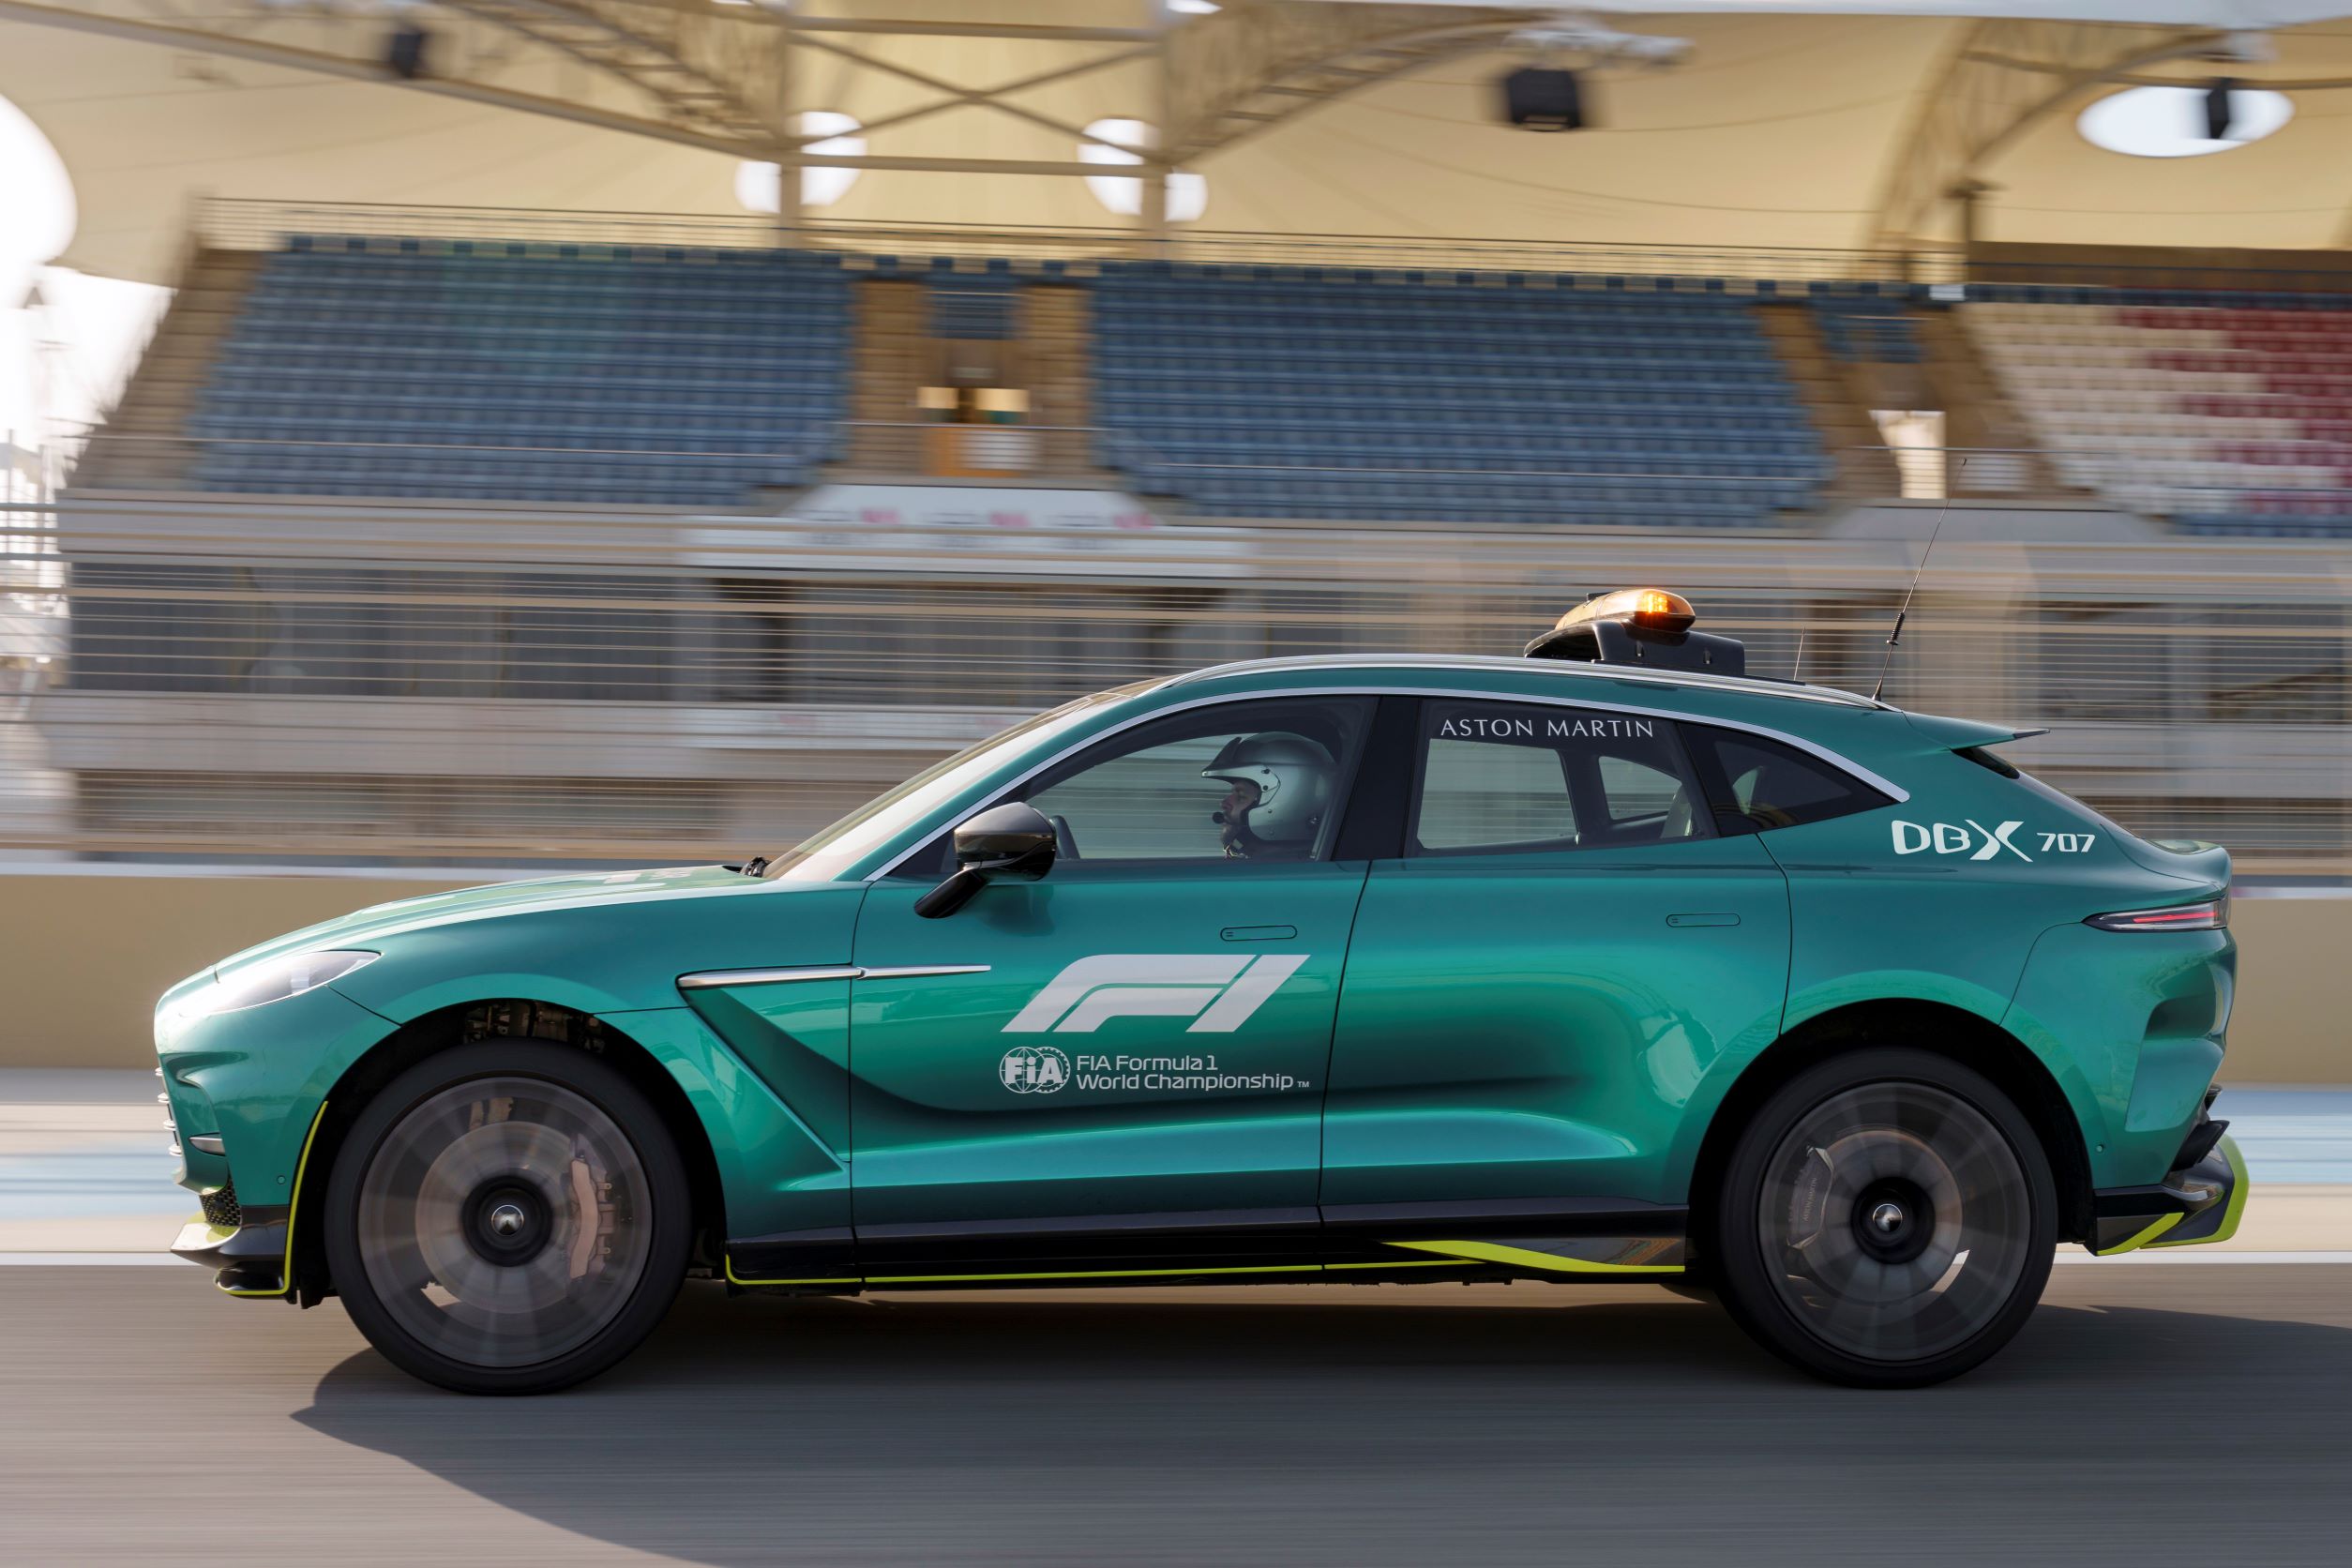 Side view of a green Aston Martin DBX707 F1 Medical Car in motion